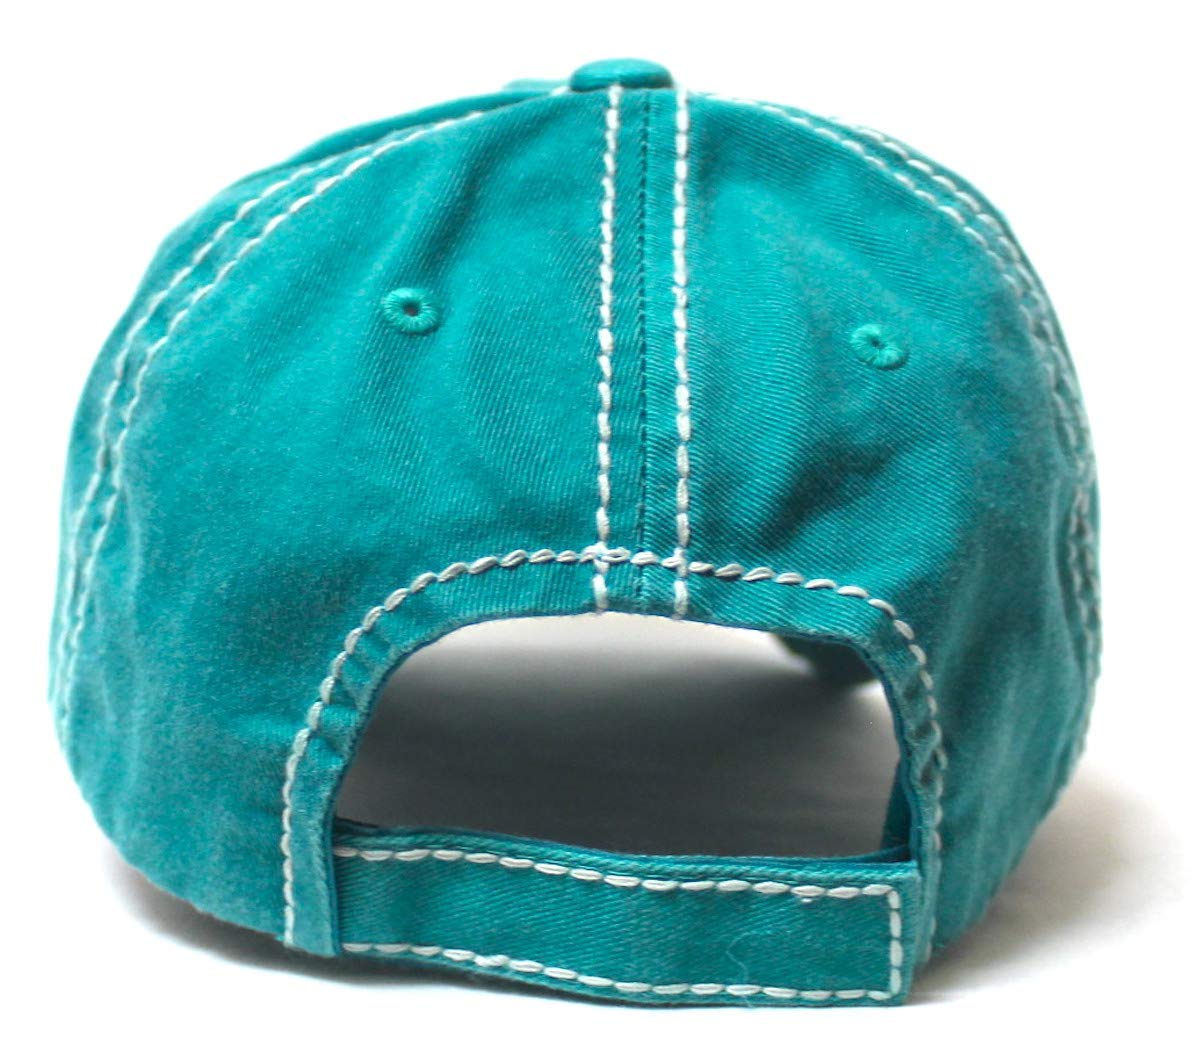 Women's Baseball Cap Camping Hair Don't Care Patch Embroidery Monogram Hat, Beach Turquoise